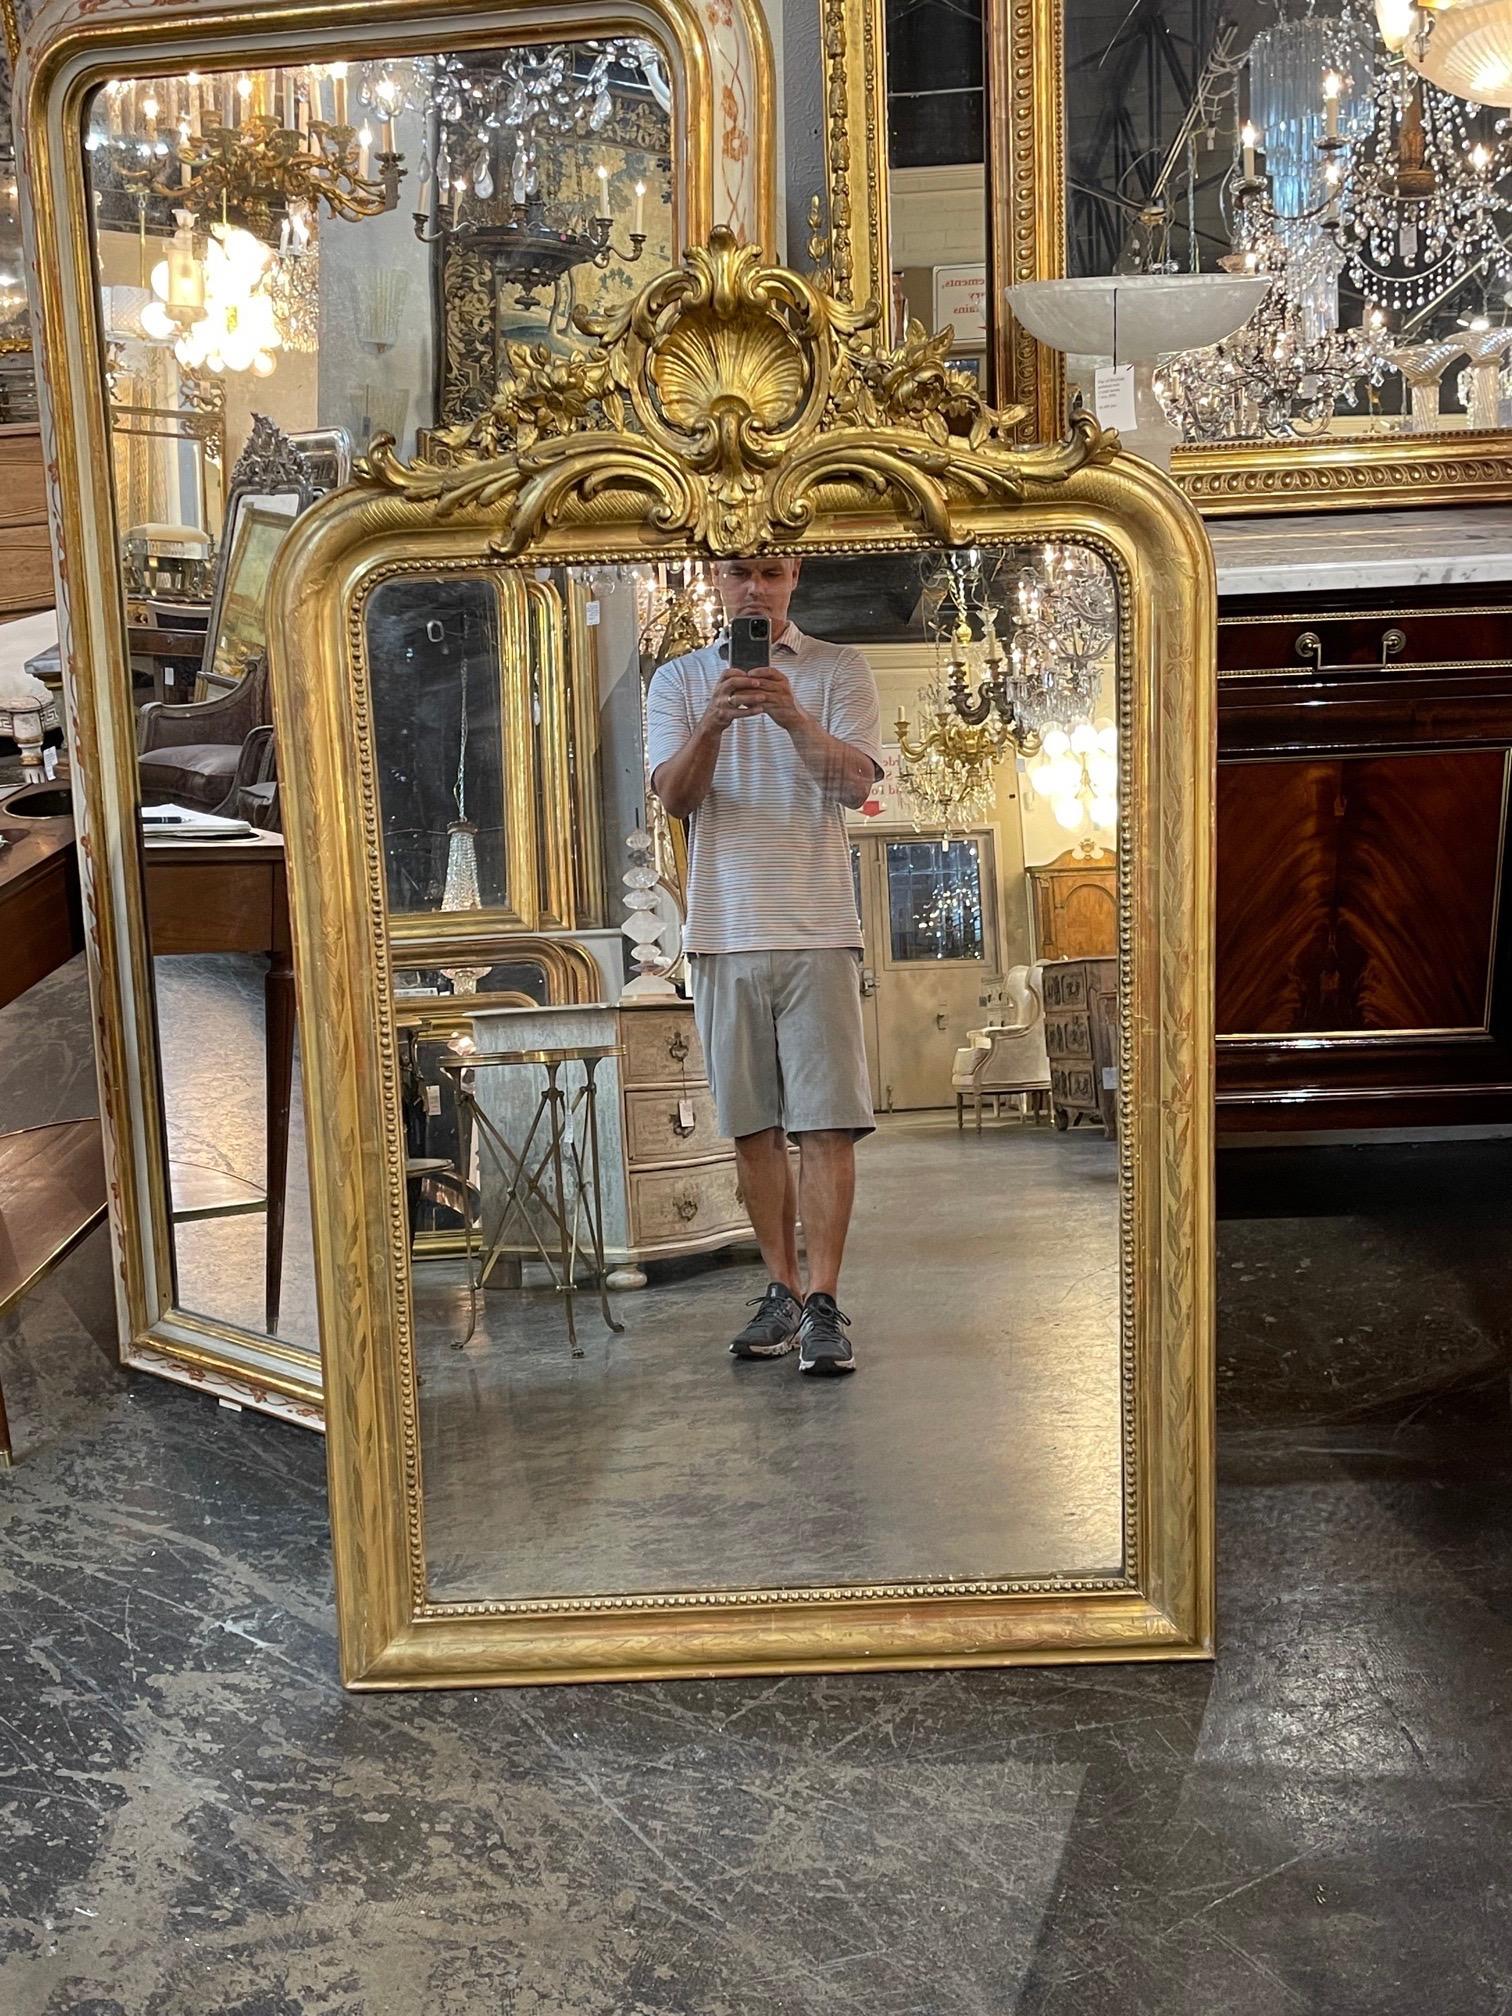 Very fine 19th century French gold Louis Philippe mirror with a beautifully carved crest at the top. There is also a floral pattern on the wood along with a beaded inner border. A real touch of elegance for a fine home!